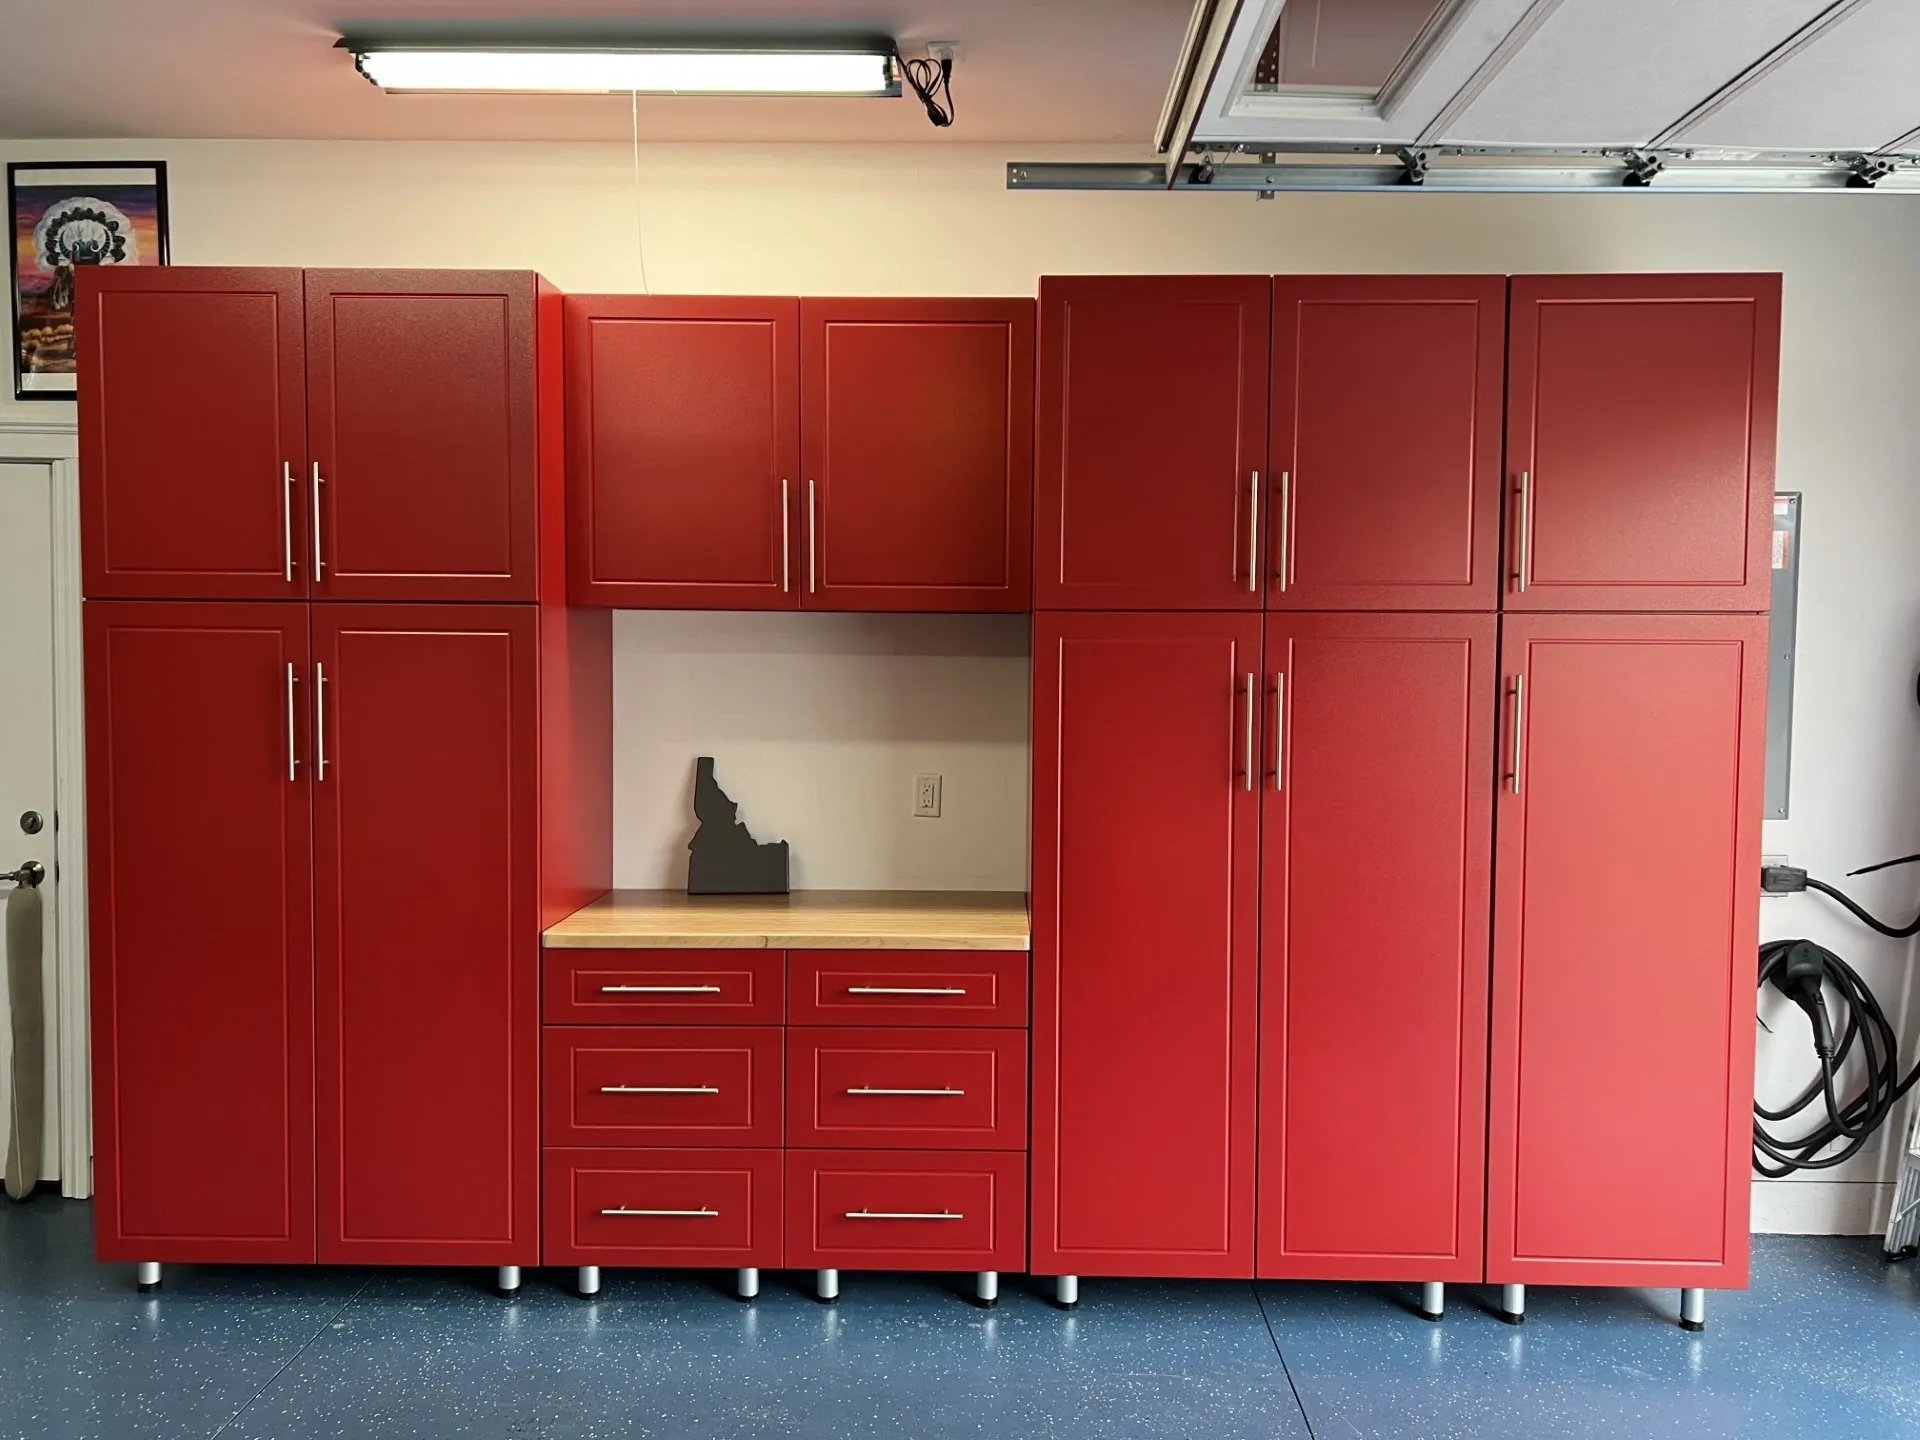 A red garage with cabinets and drawers in it